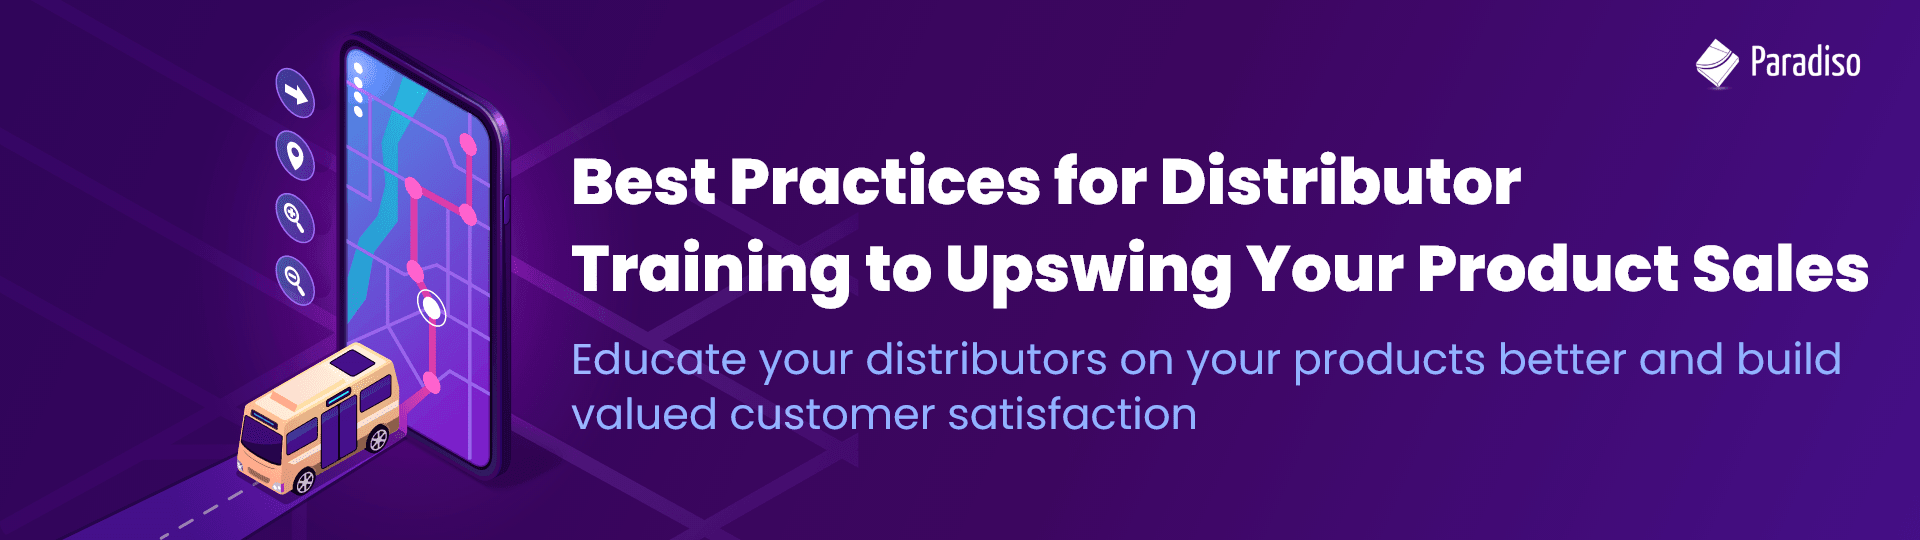 Best Practices for Distributor Training to Upswing Your Product Sales